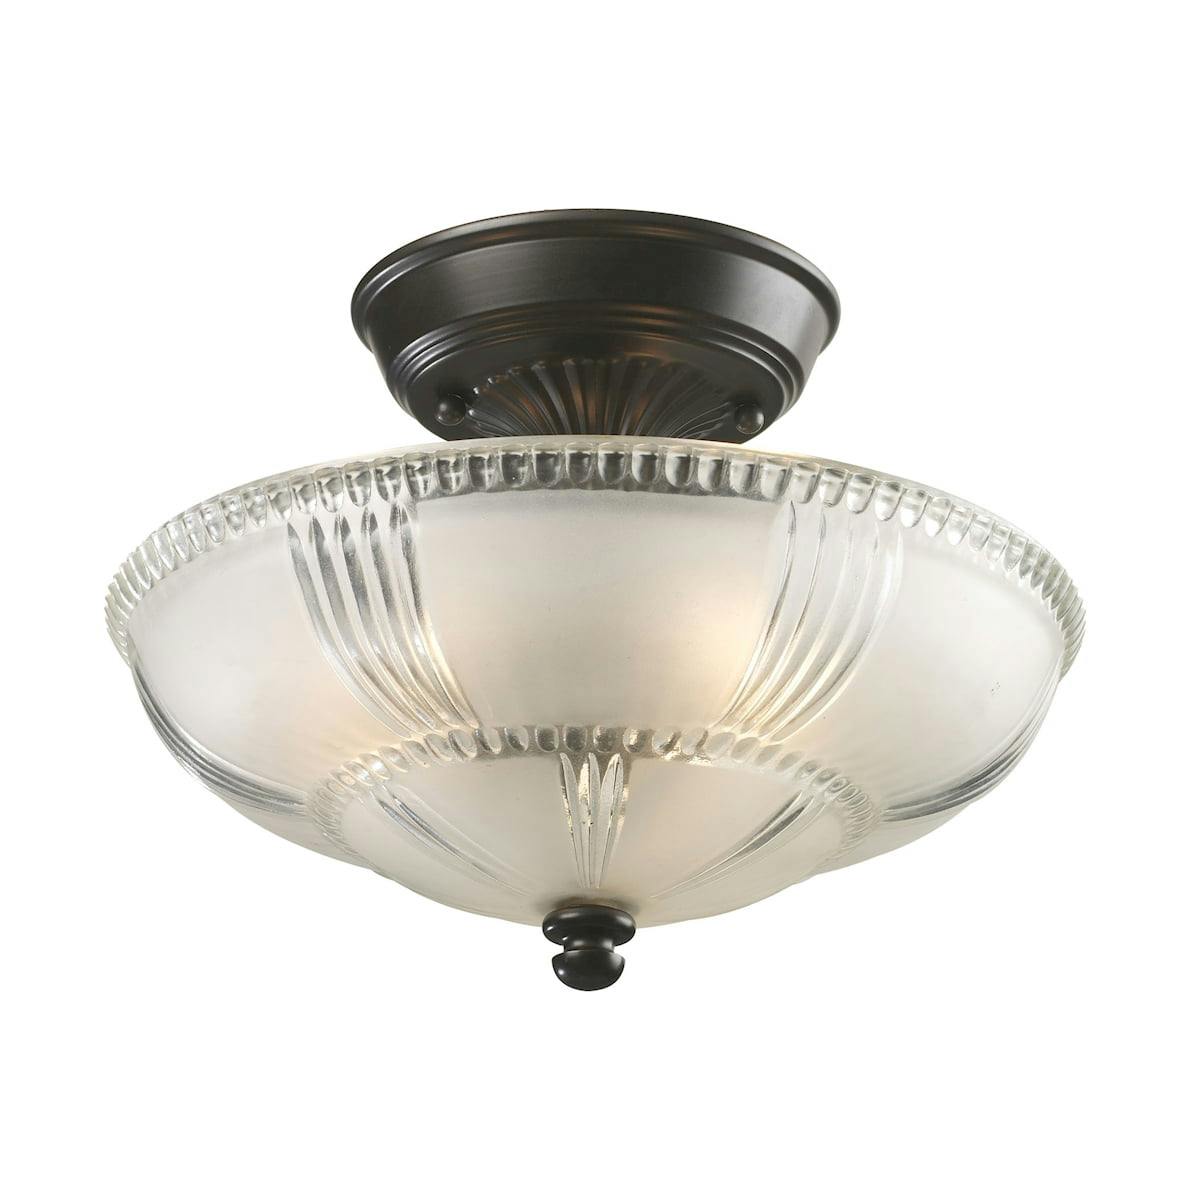 Vintage Charm Oiled Bronze 3-Light Semi-Flush Mount with Frosted Glass